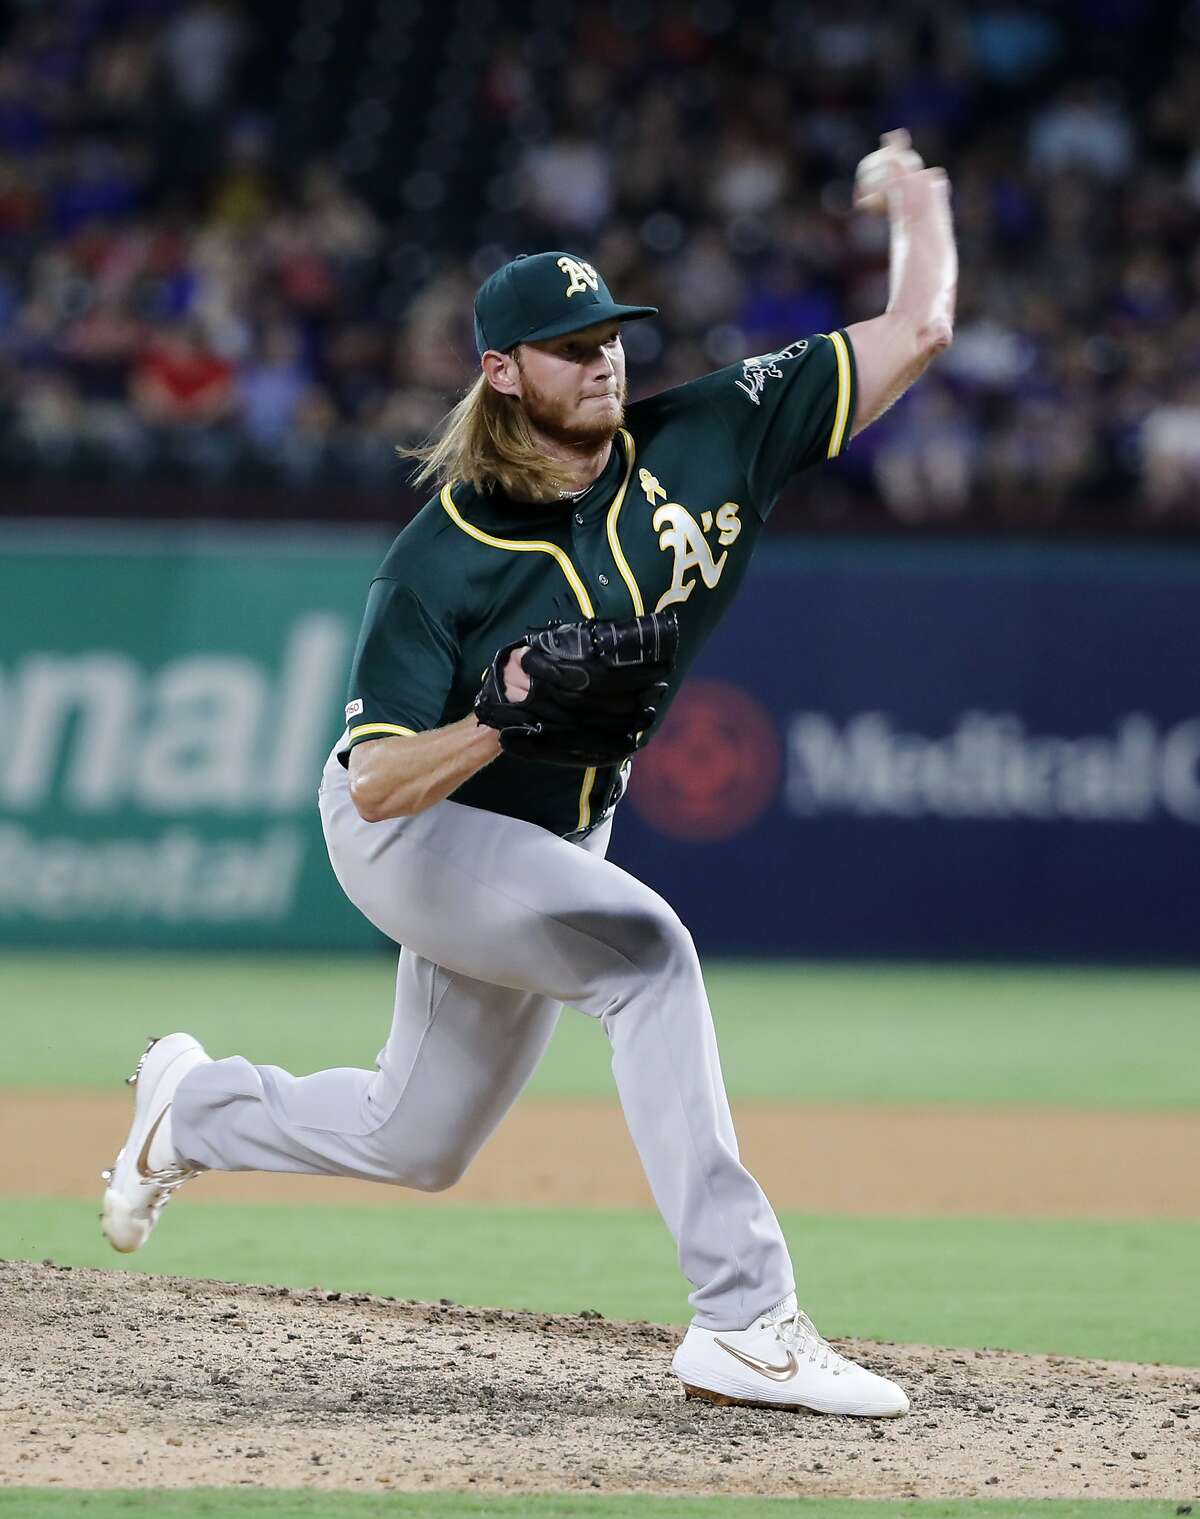 Oakland Athletics' A.J. Puk throws to a Texas Rangers batter during the seventh inning of a baseball game in Arlington, Texas, Friday, Sept. 13, 2019. (AP Photo/Tony Gutierrez)